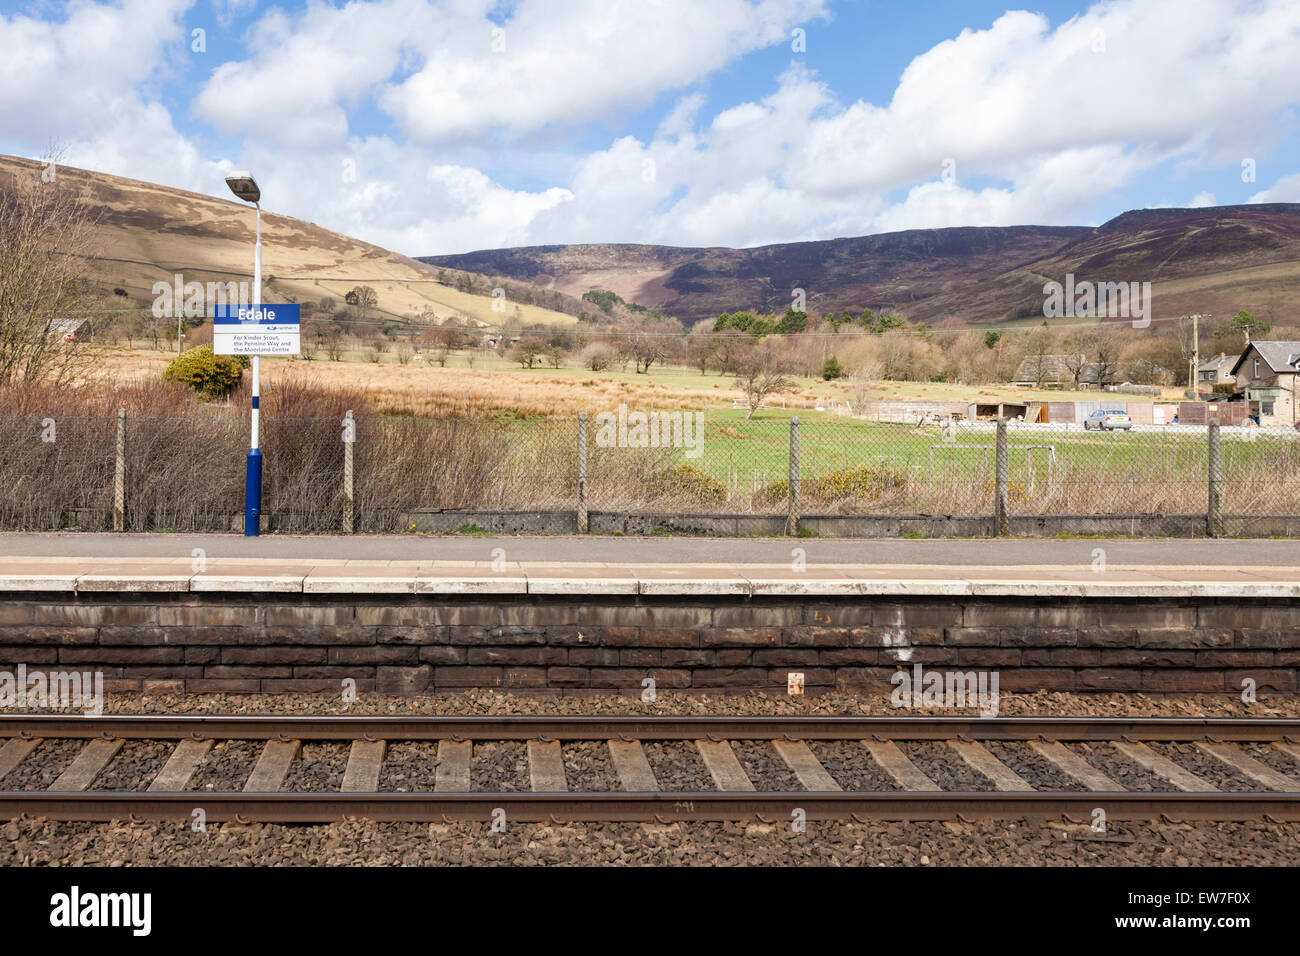 The rural railway station at Edale with Kinder Scout in the distance, Peak District National Park, Derbyshire, England, UK Stock Photo